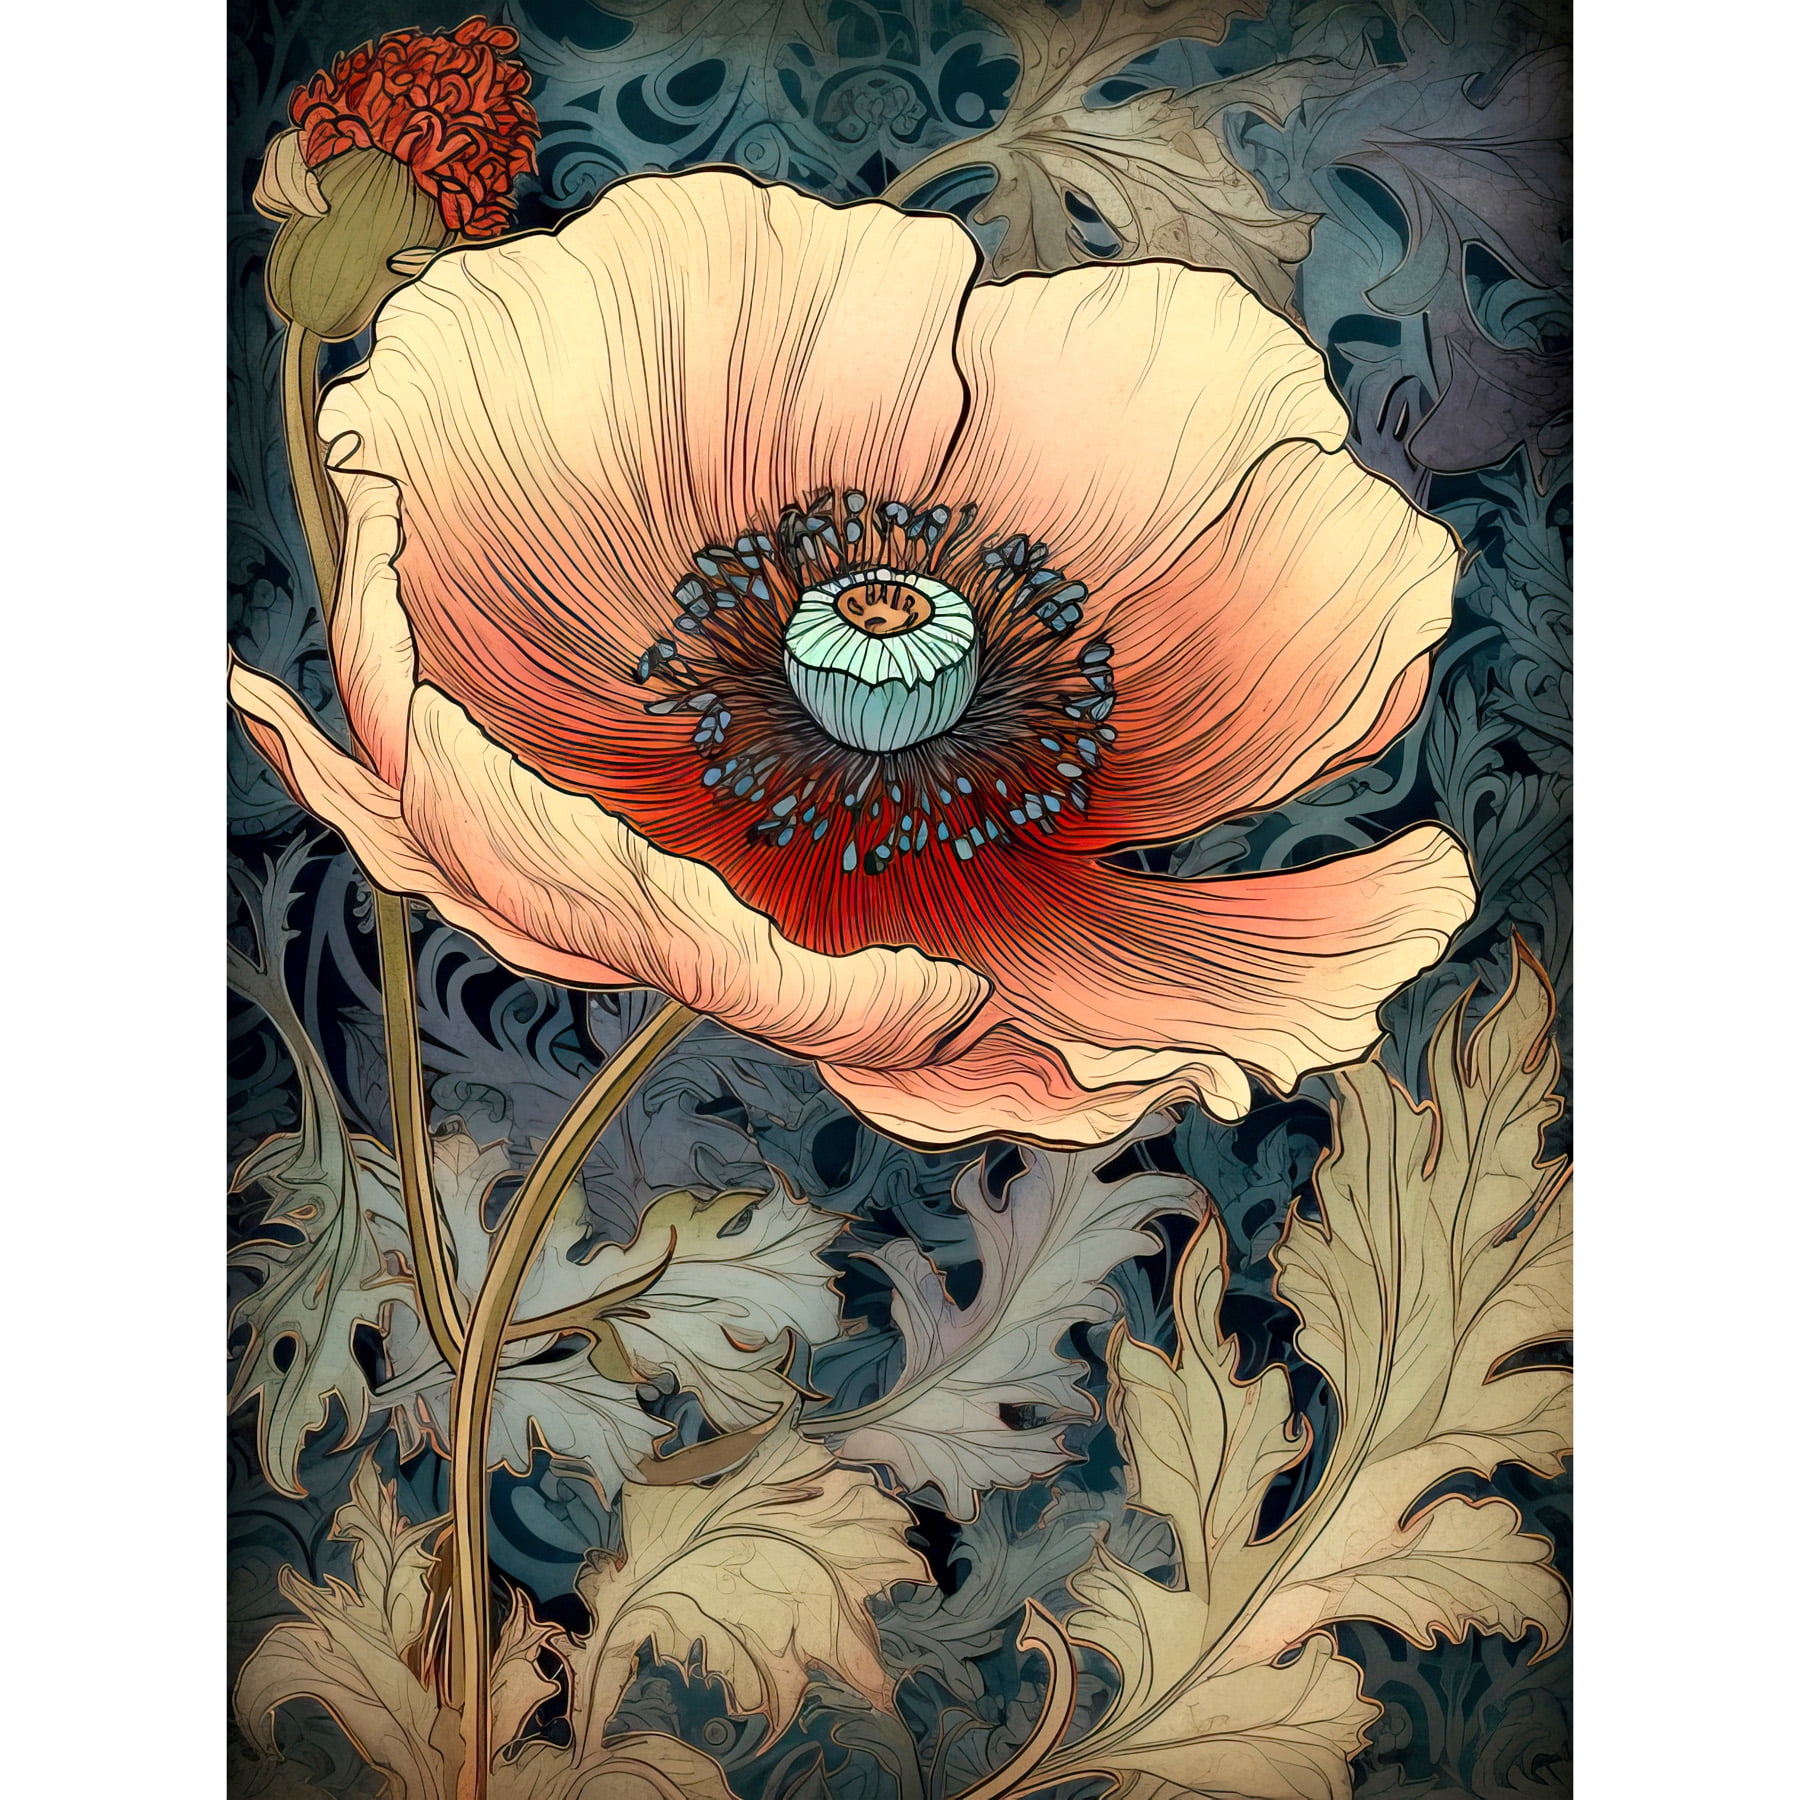 William Morris Style Peach Anemone Flower Bloom Large Wall Art Poster Print  Thick Paper 18X24 Inch